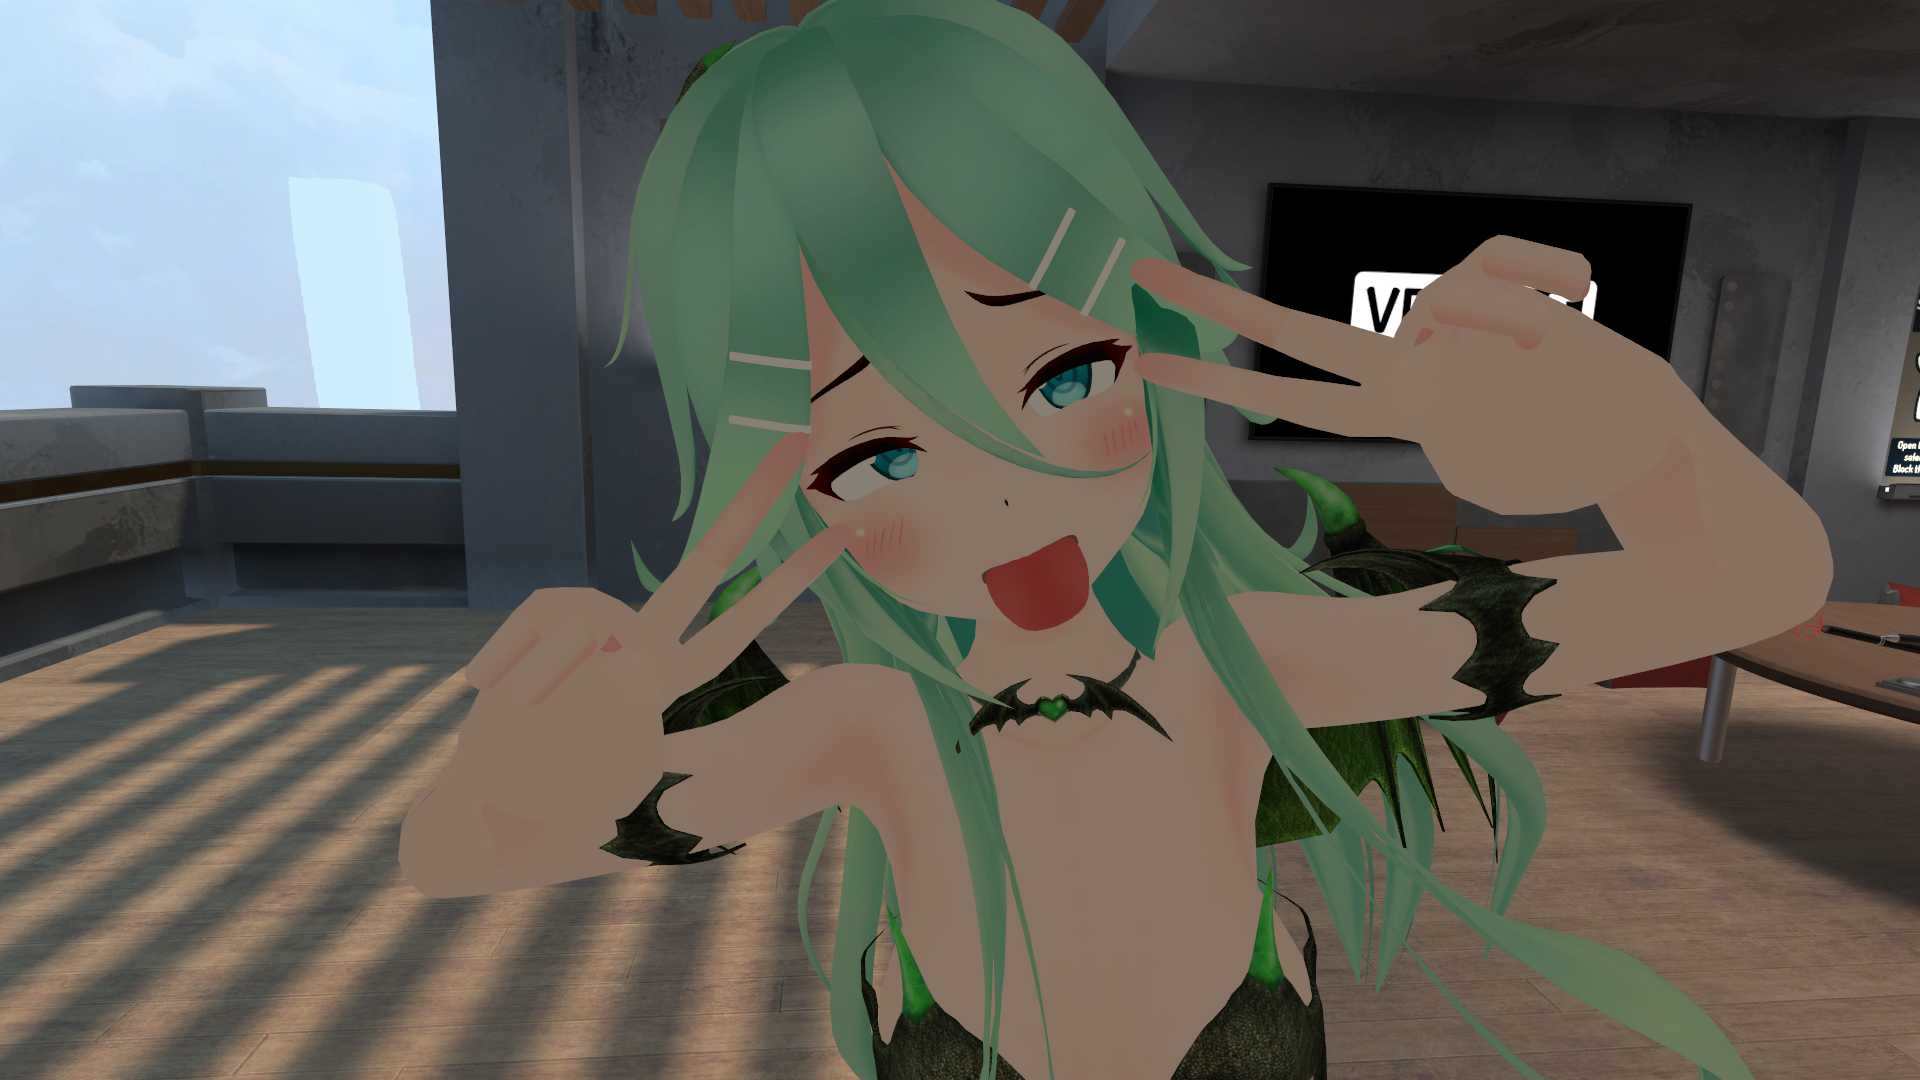 Erp in vrchat